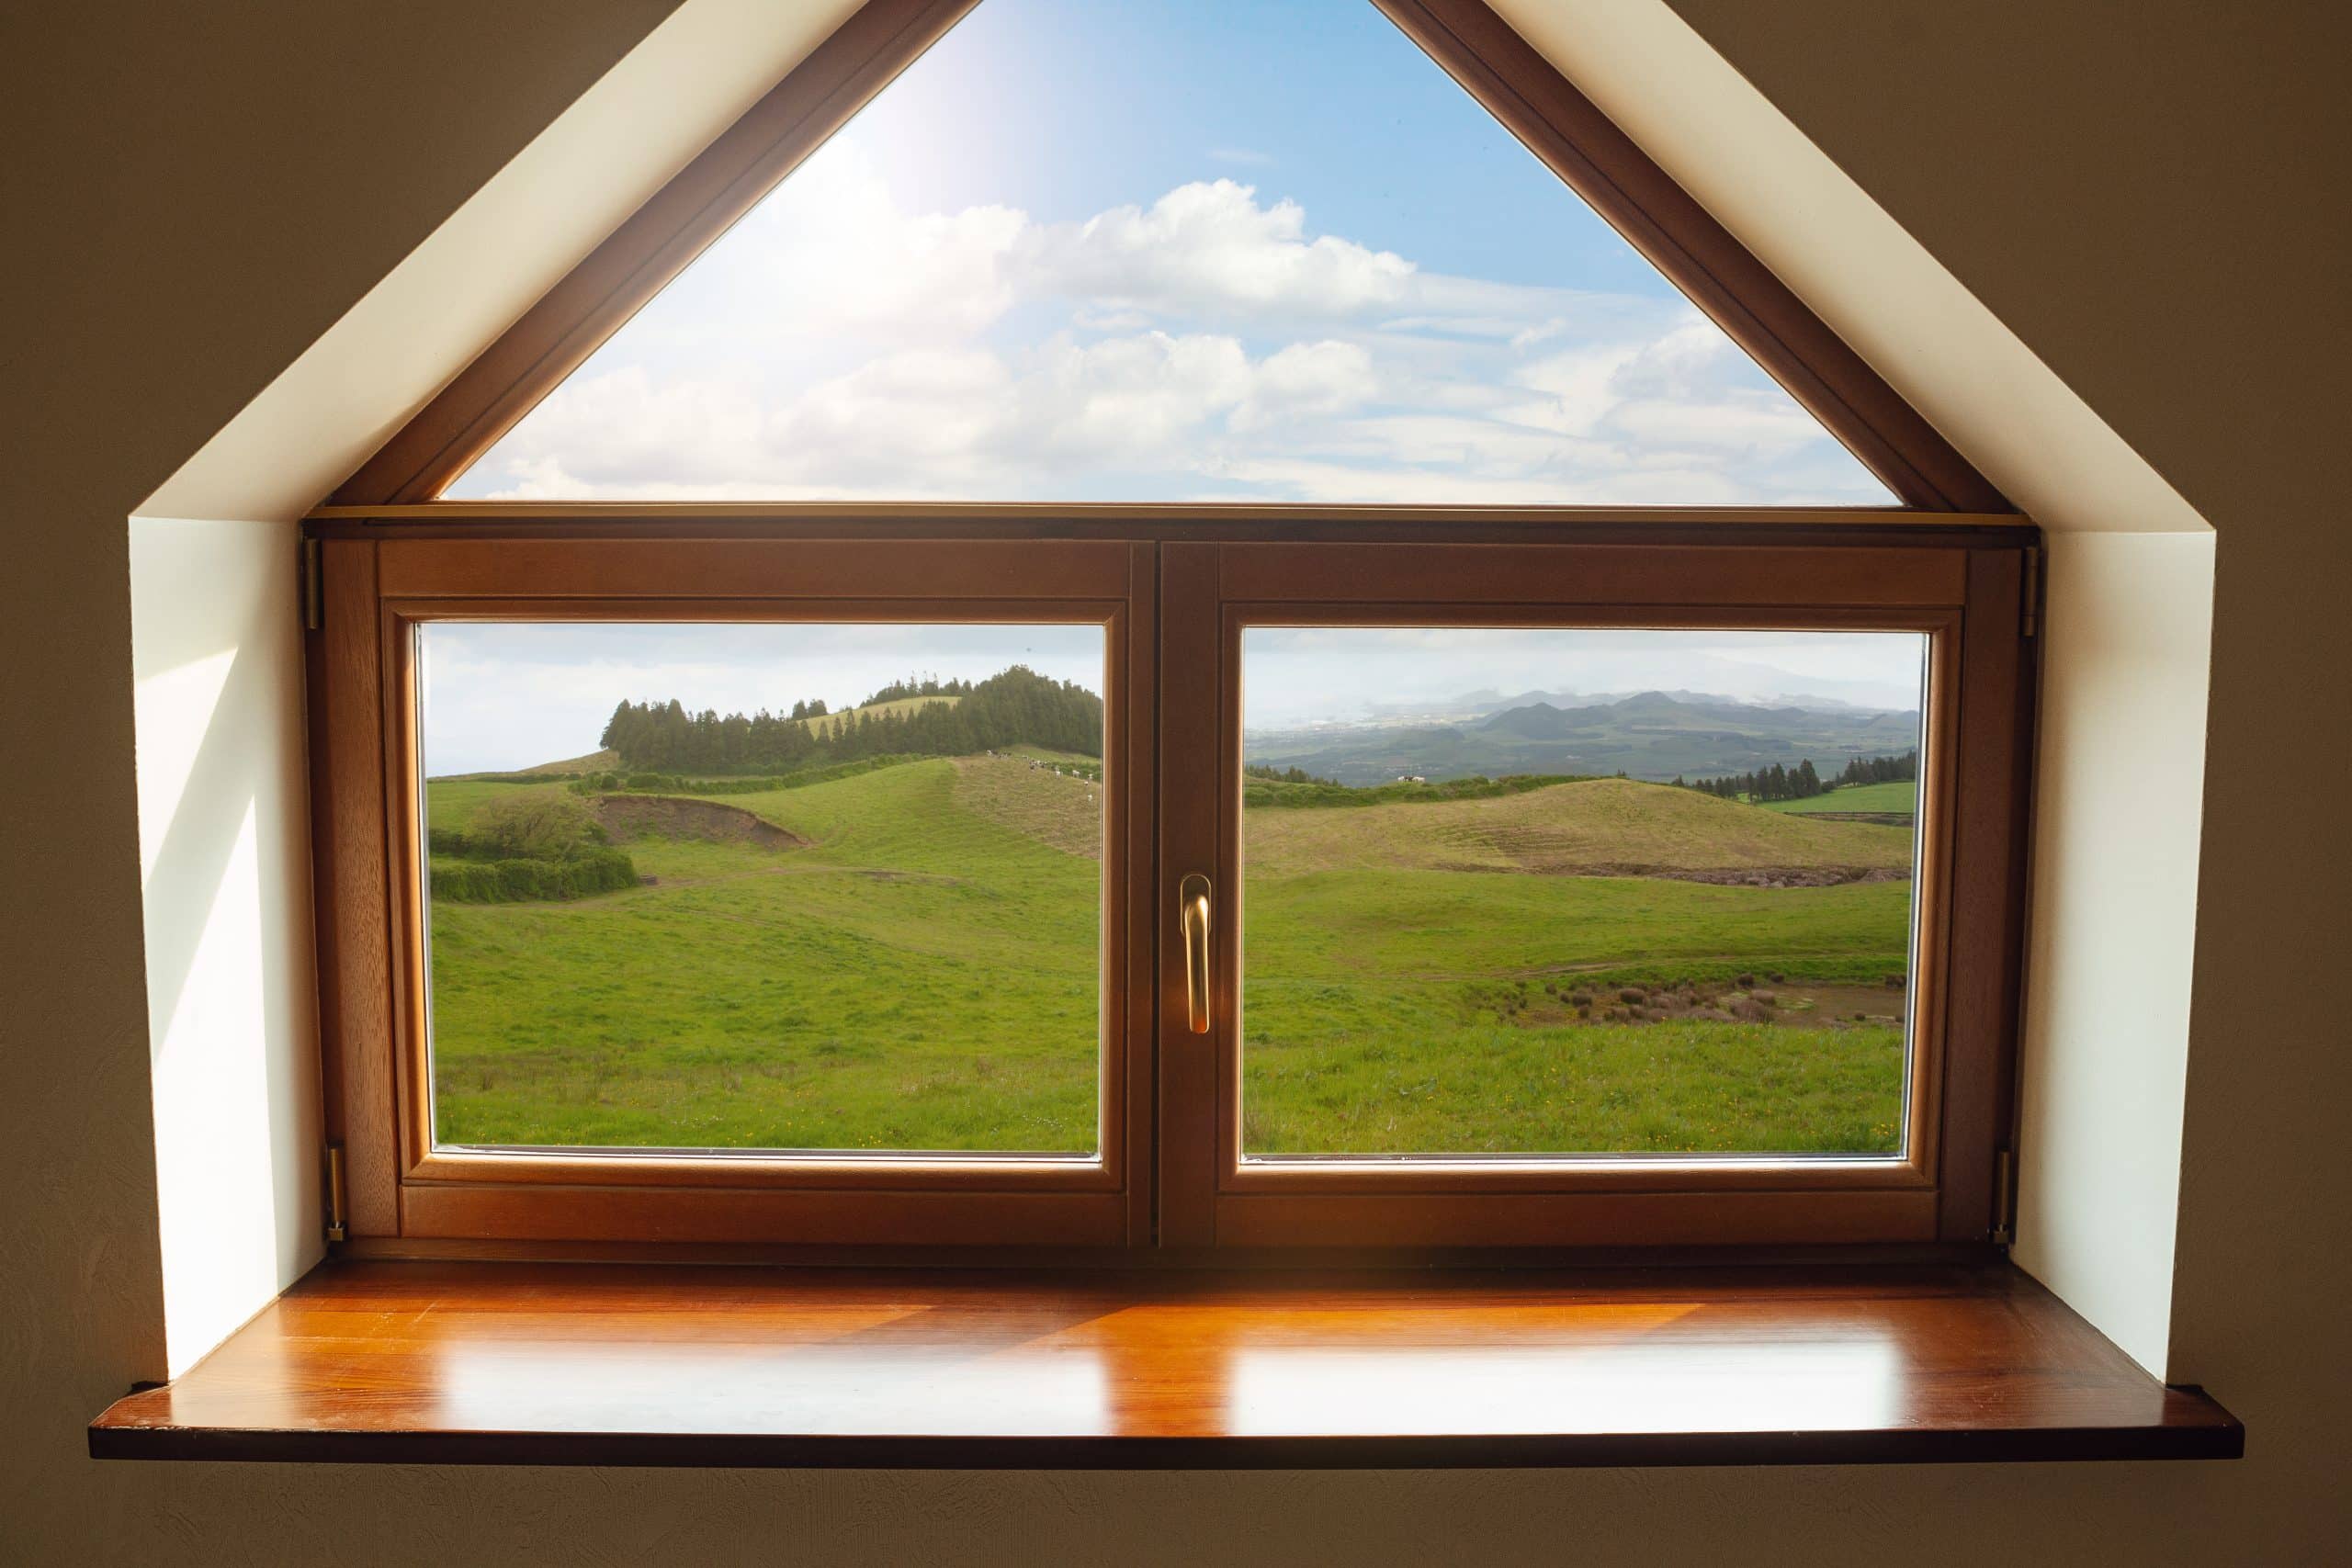 How to Install New Windows Wisely